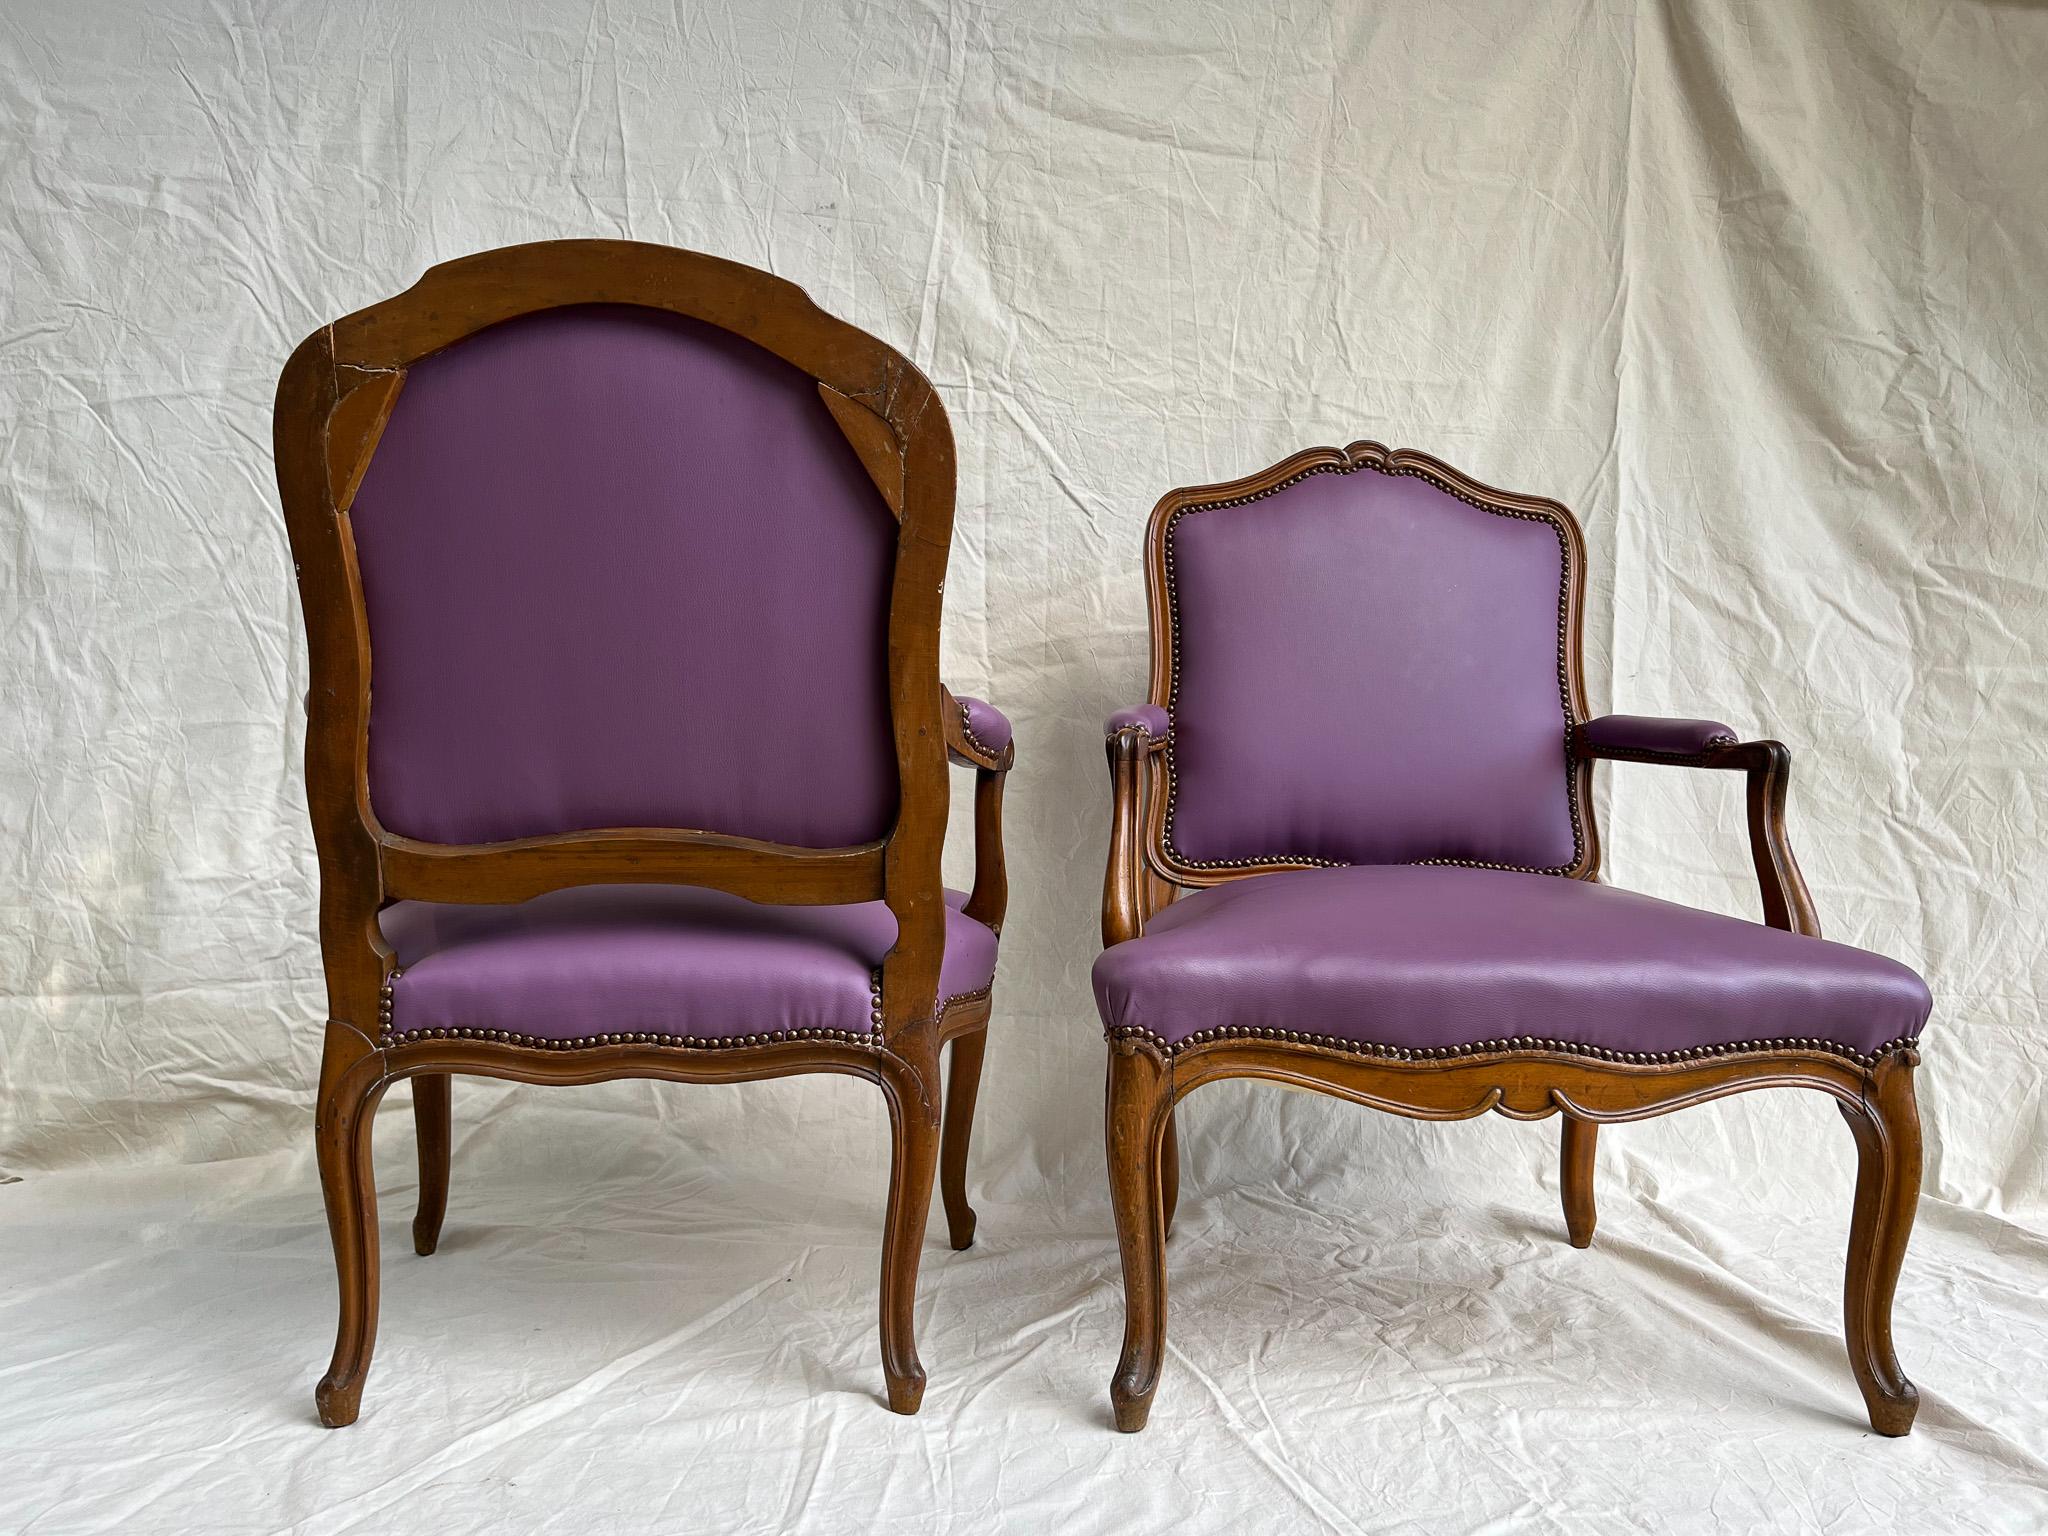 Set of Two Louis XVI Chairs, in Carved Walnut, France, 18th Century '1774-1791' For Sale 2